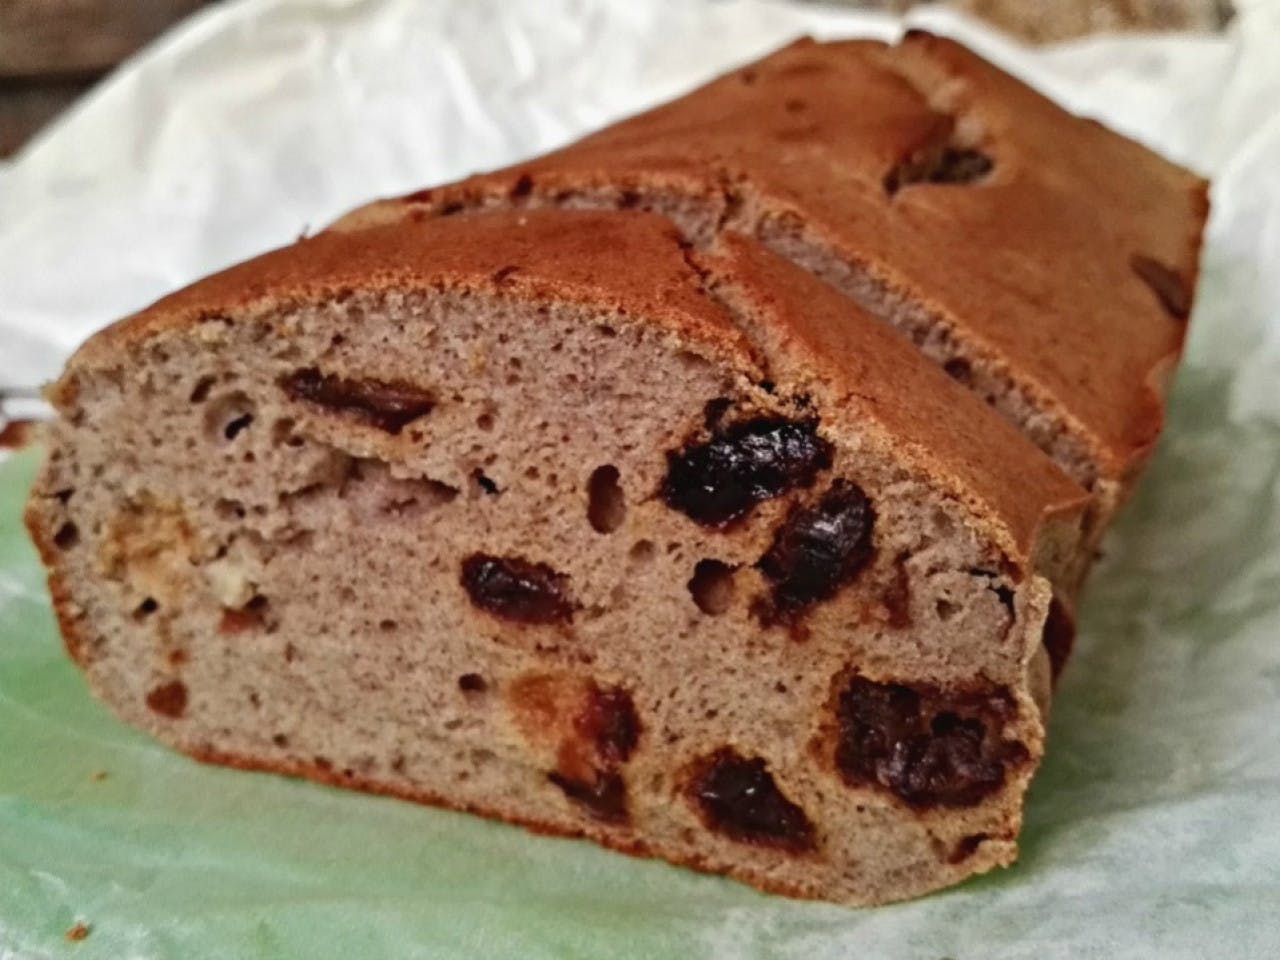 Banana bread with speculoos and buckwheat flour